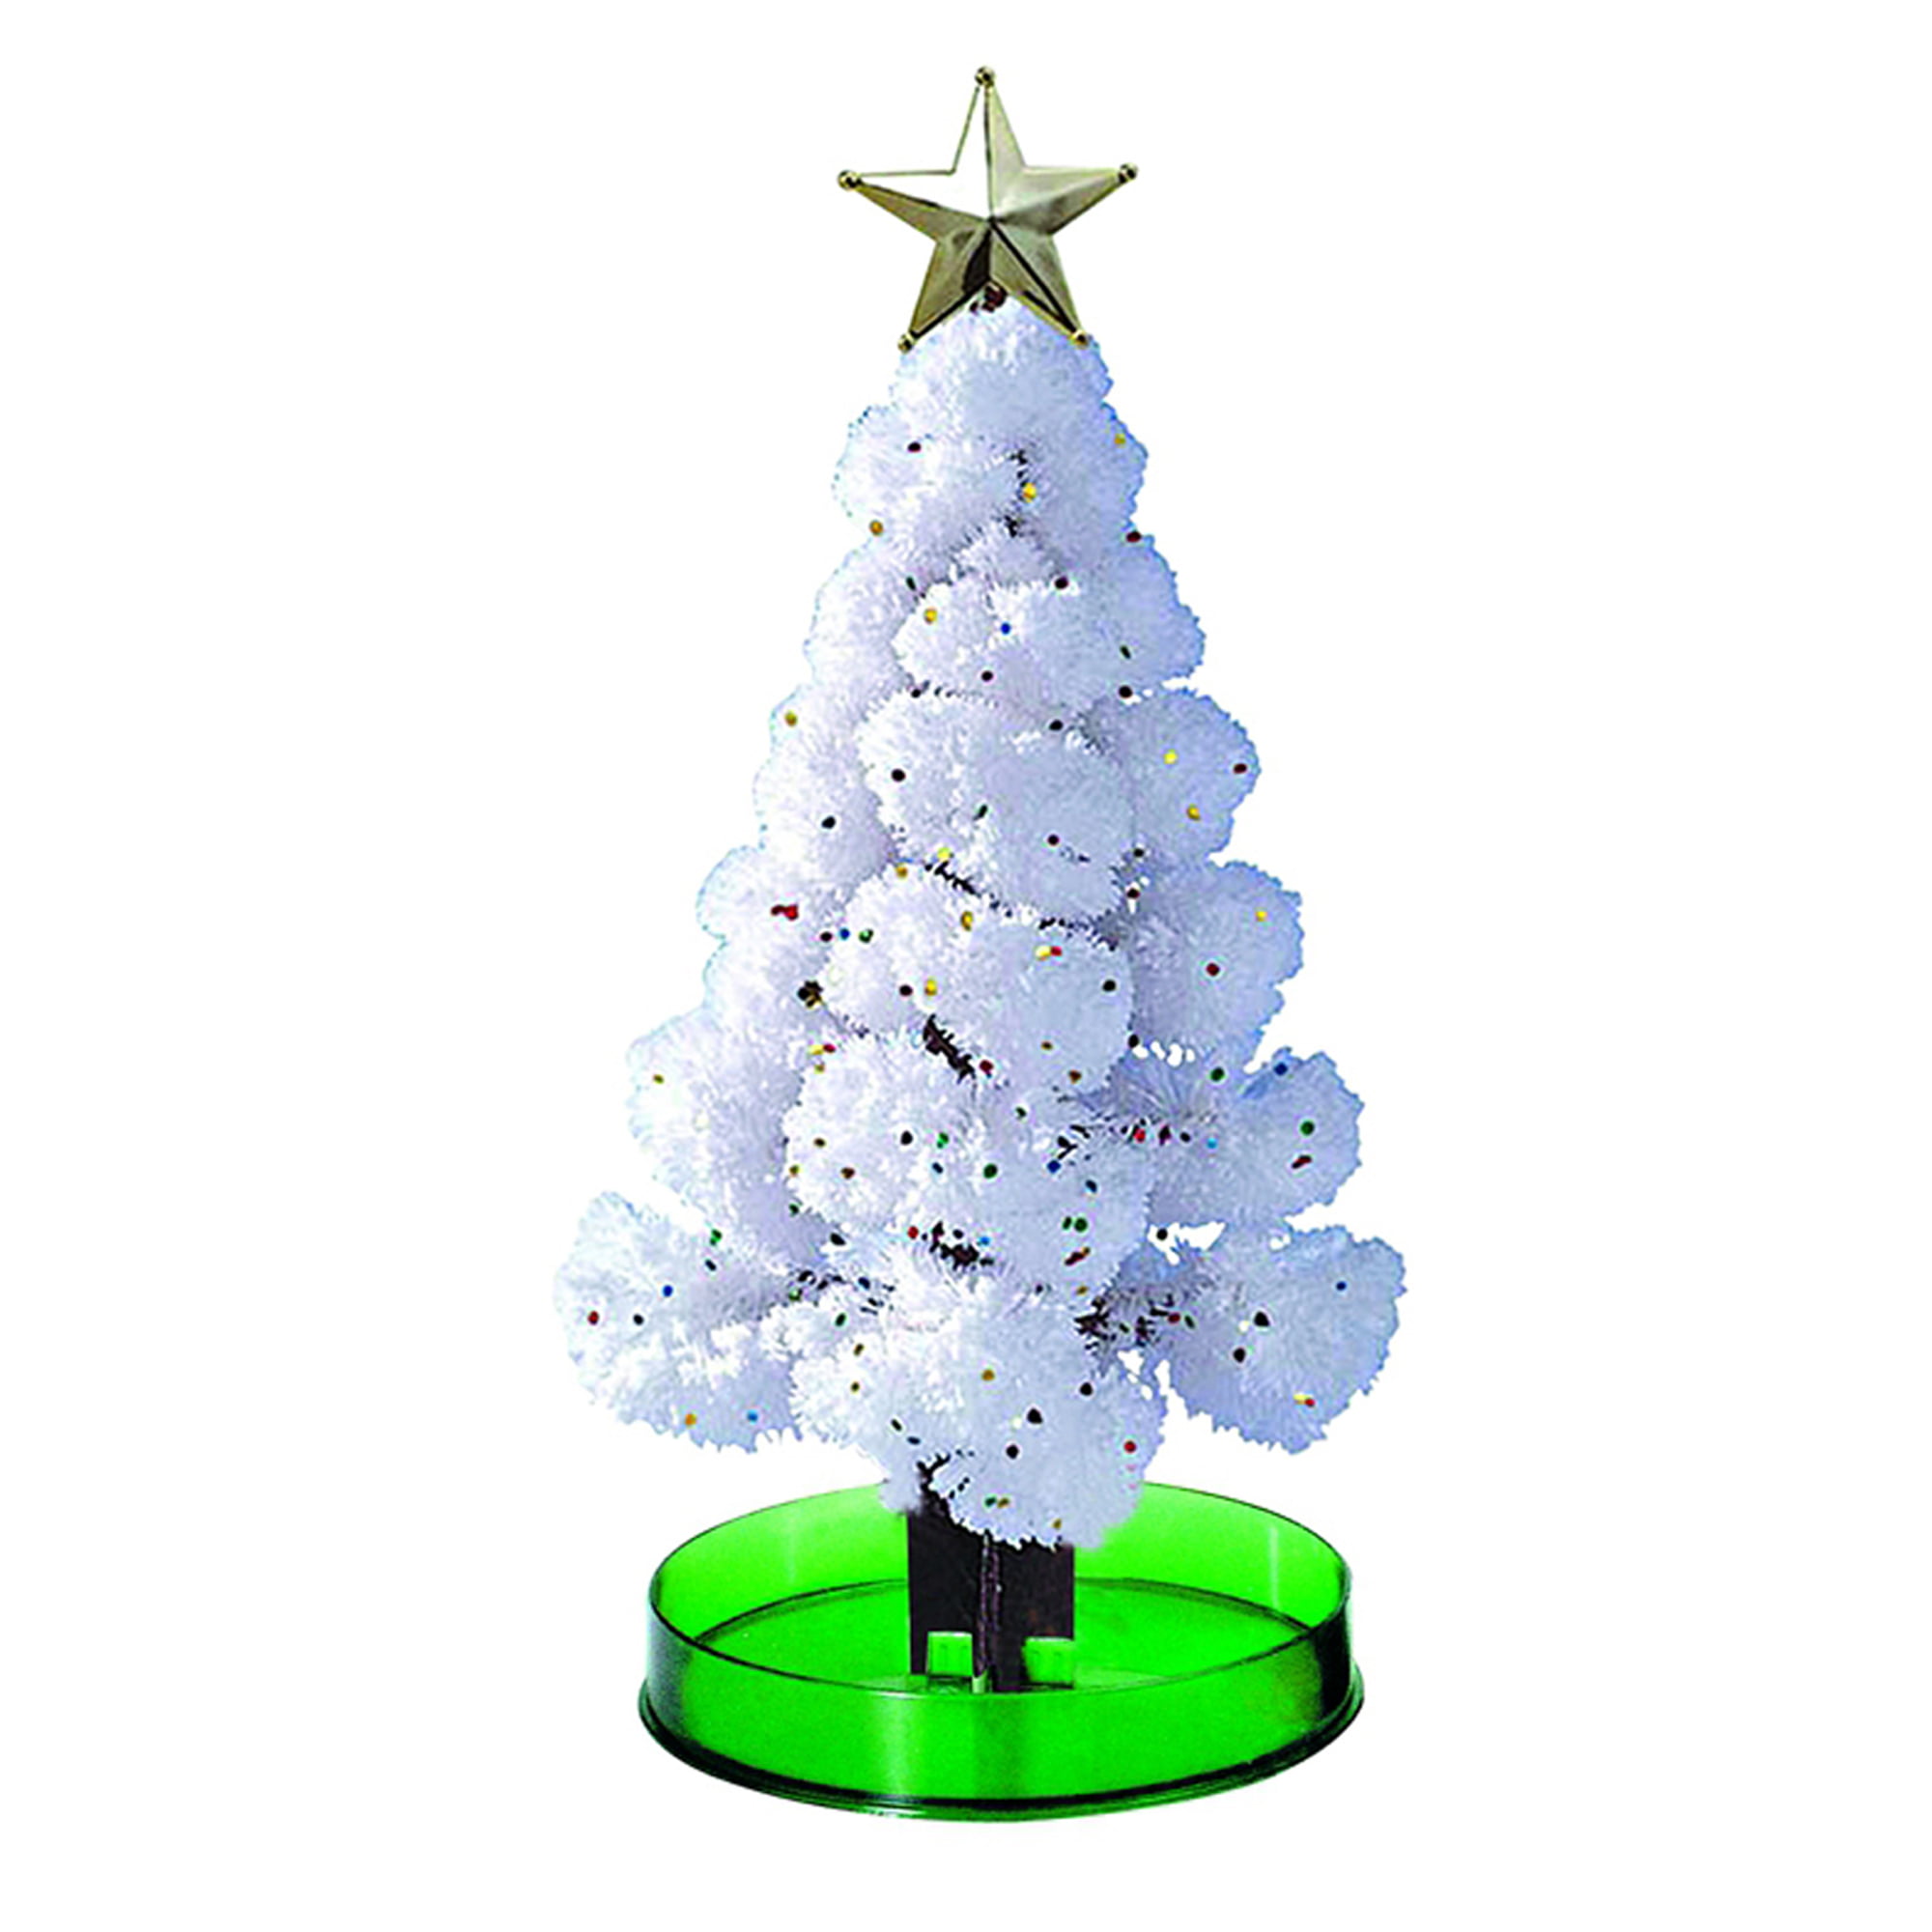 Details about   Creative Filler Magic Growing Christmas Tree Funny Crystal Gift Toy Stocking 